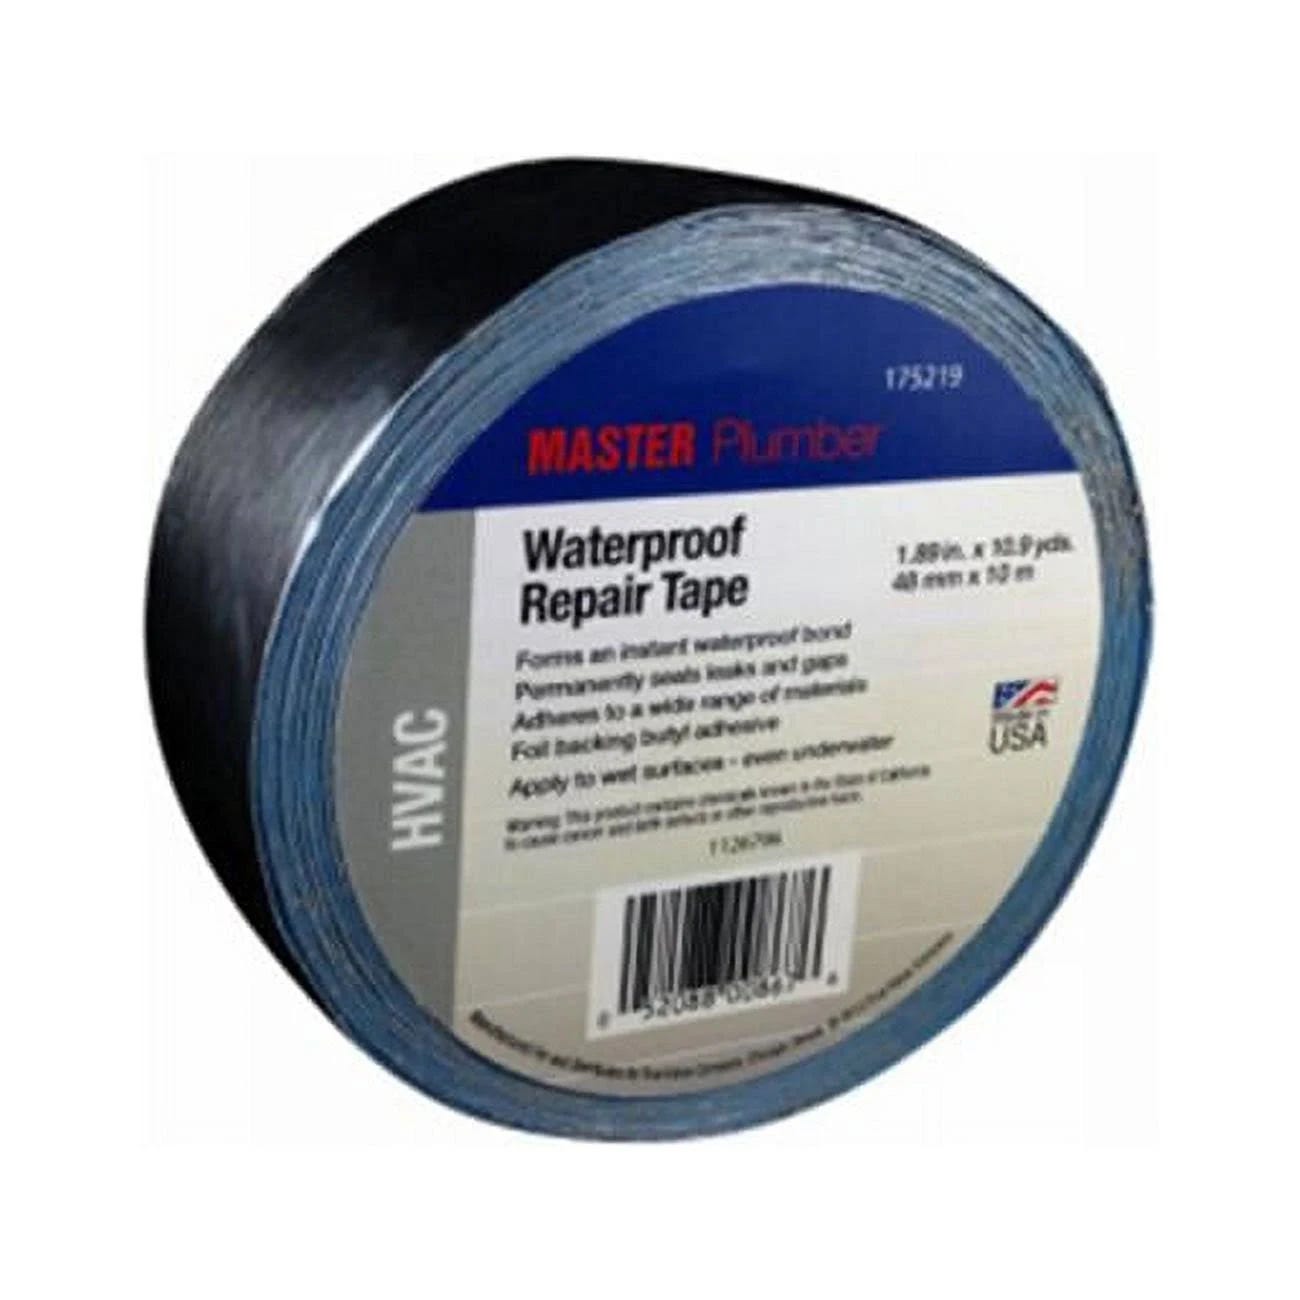 Waterproofing Repair Tape for Weather and UV Resistance | Image